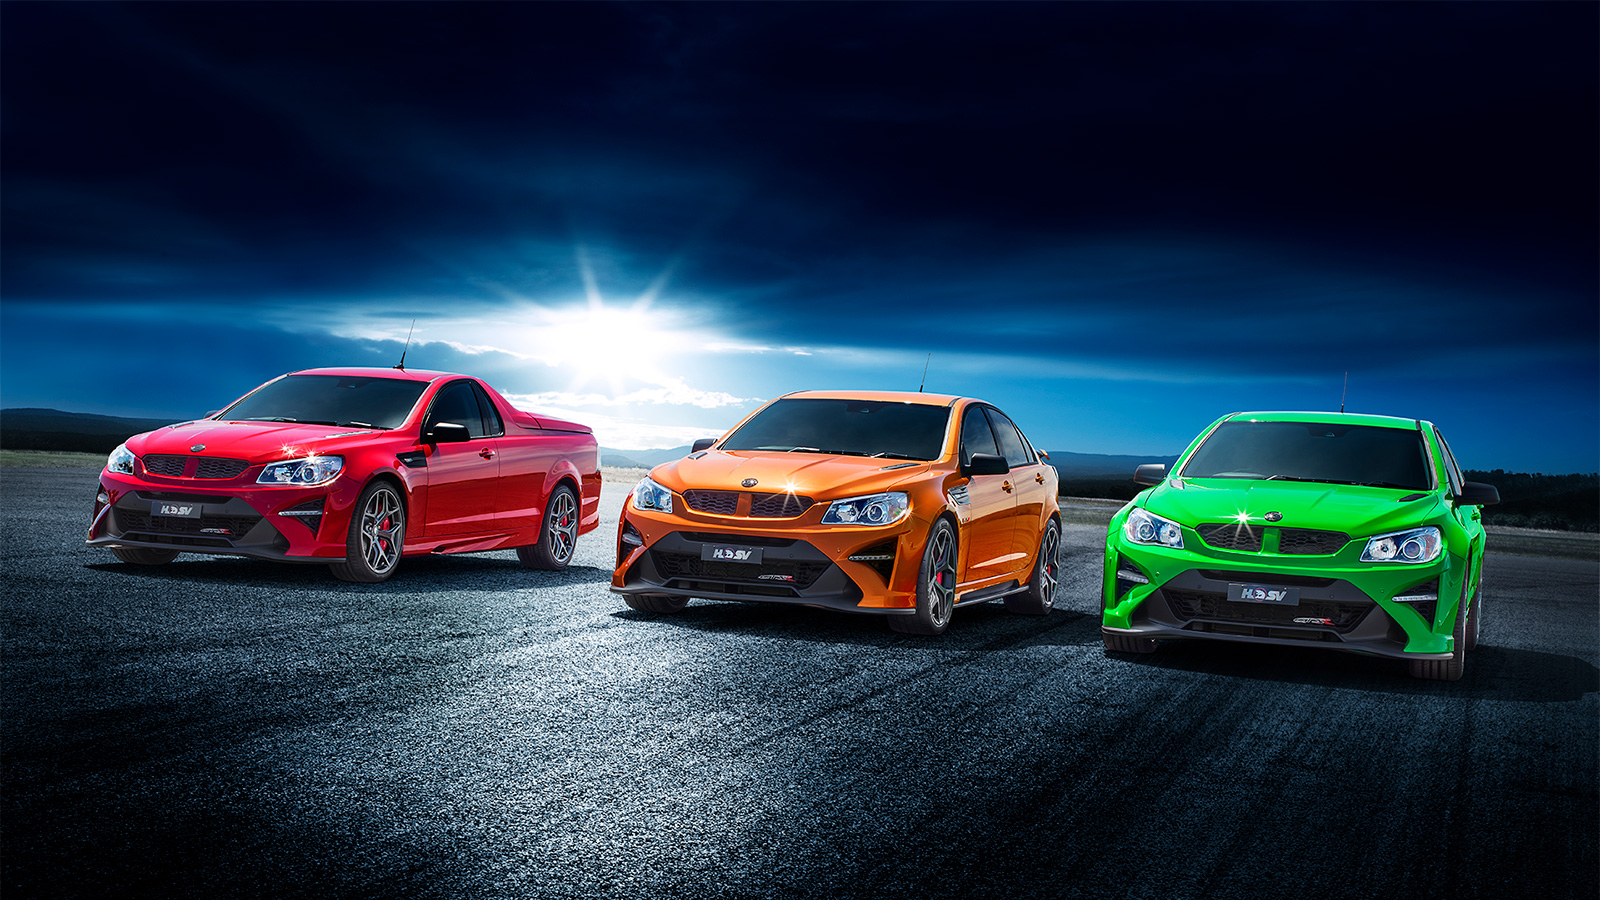 Drawing on its racing heritage, all three vehicles – GTSR (sedan), GTSR Maloo and GTSR W1 - share consistent, track-inspired styling and performance DNA.